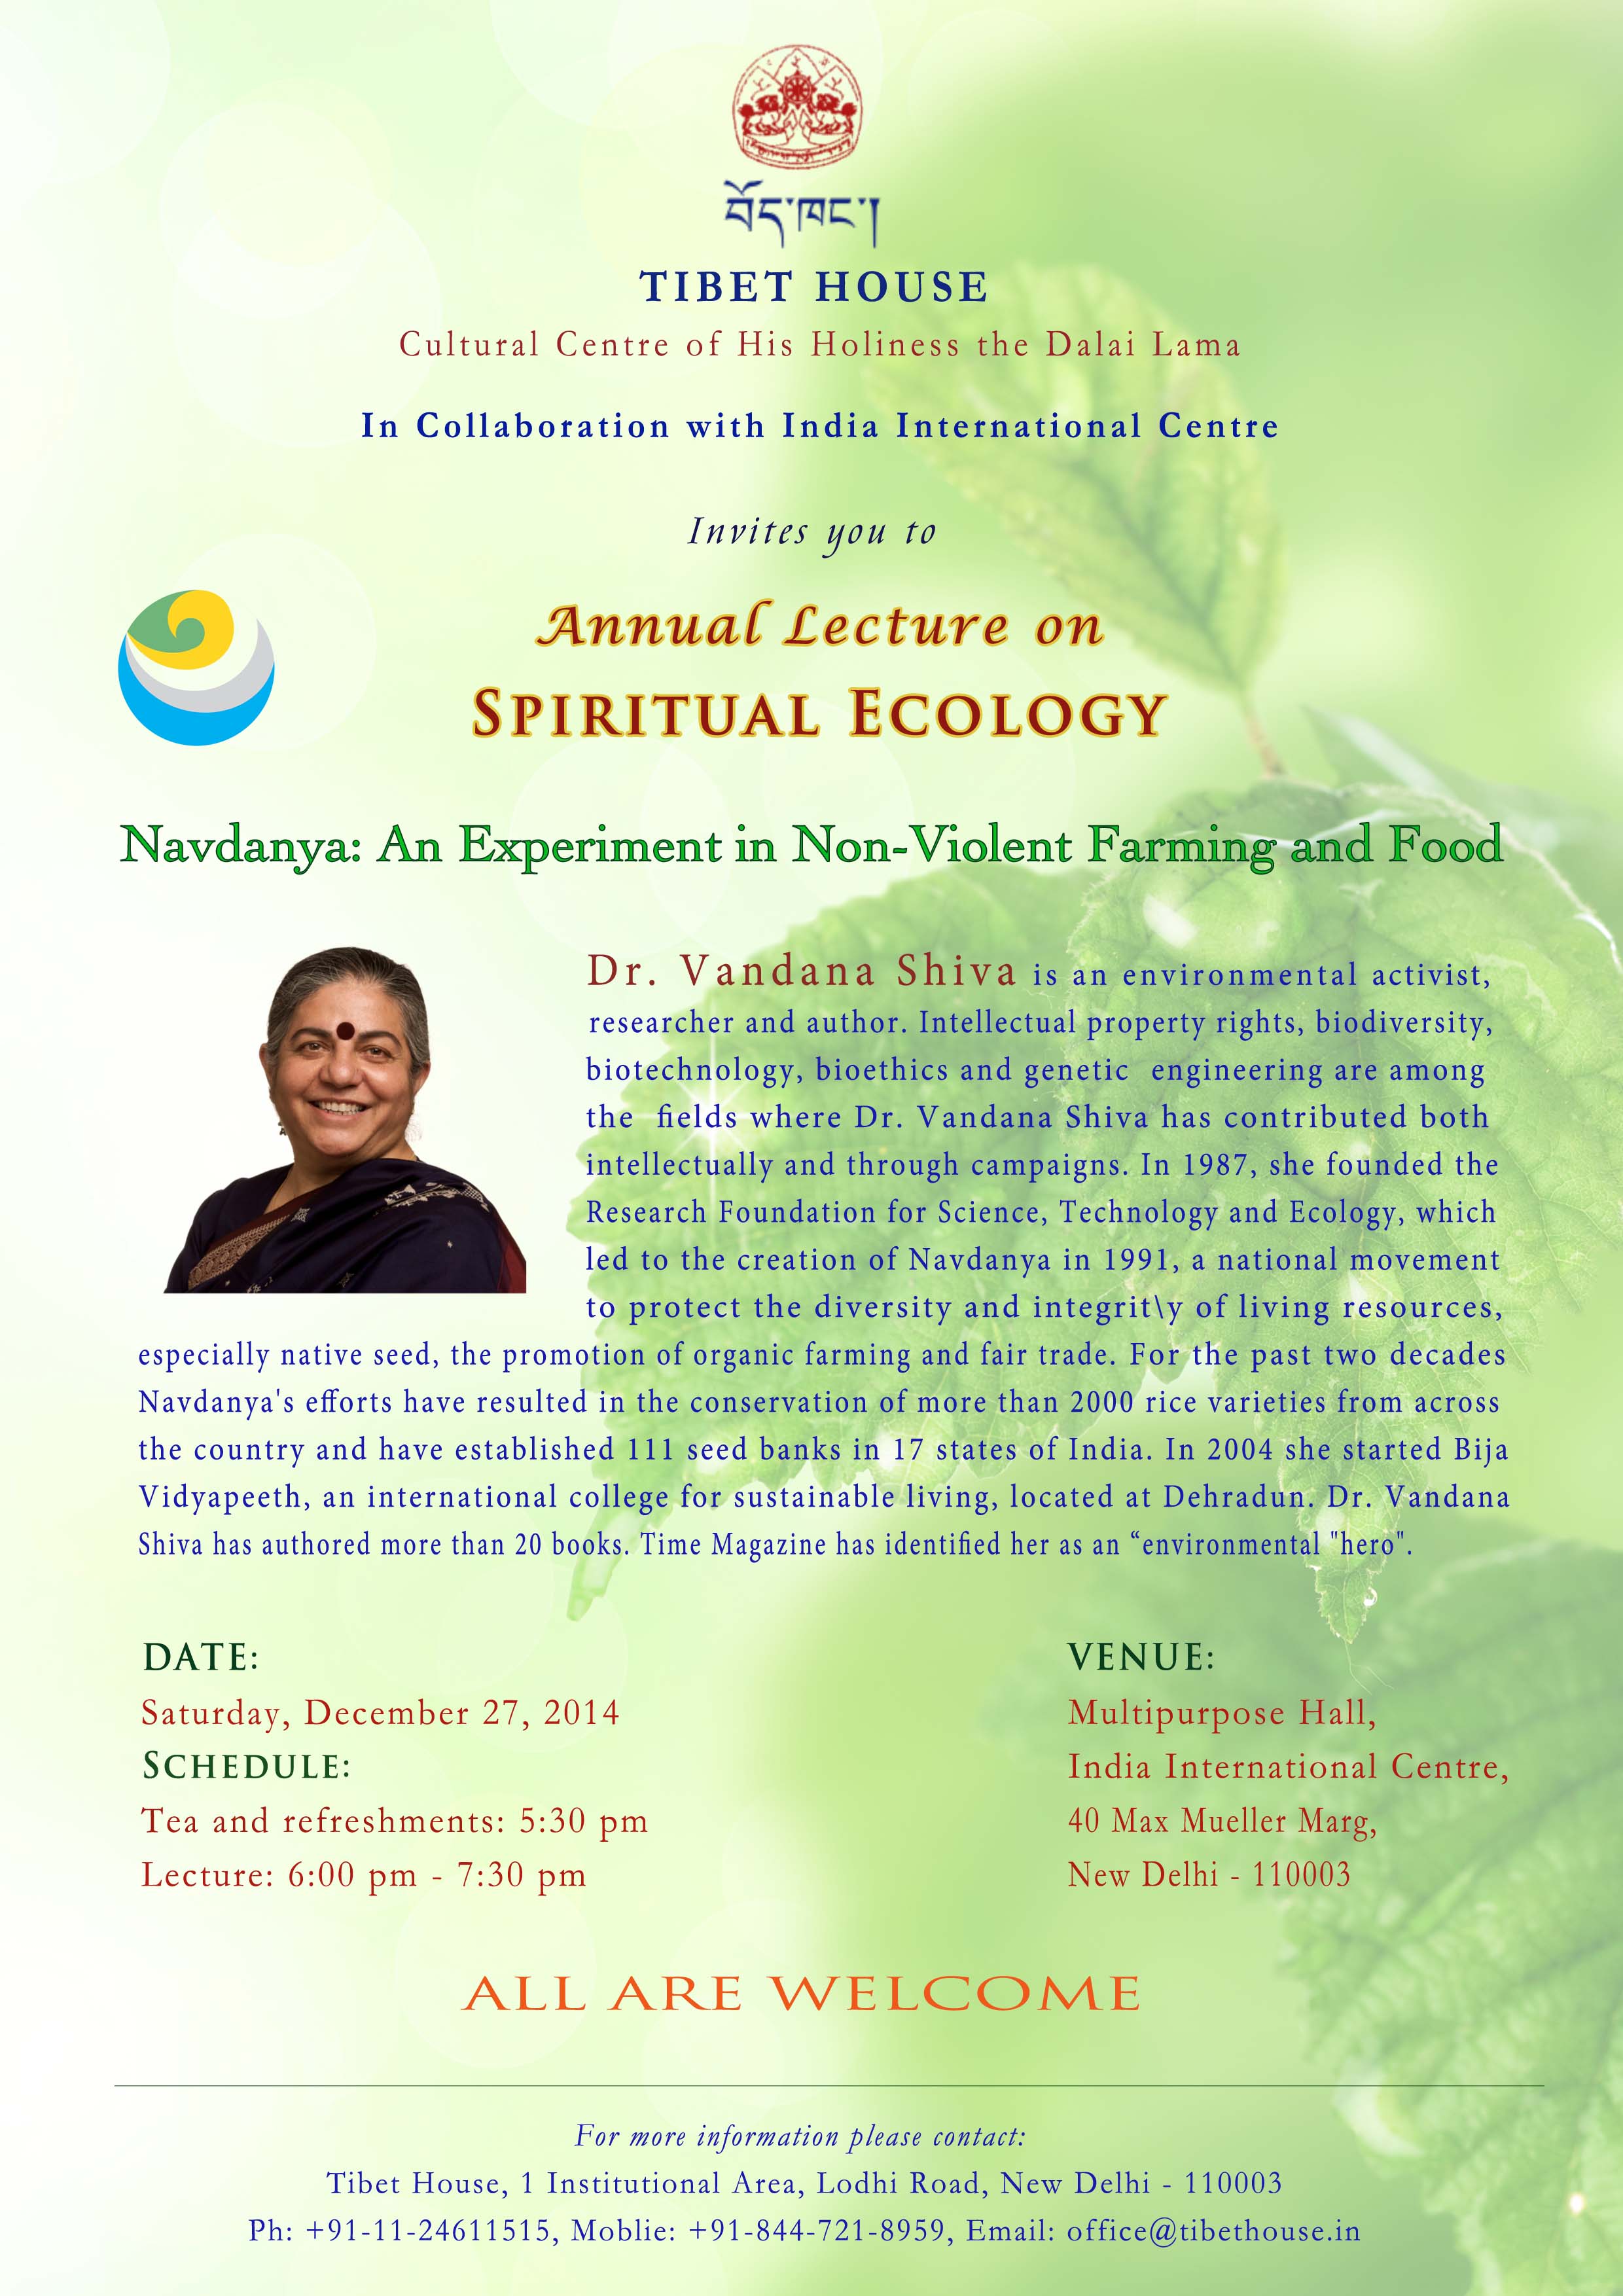 Annual Lecture on Spiritual Ecology - Navdanya: An Experiment in Non-violent Farming and Food